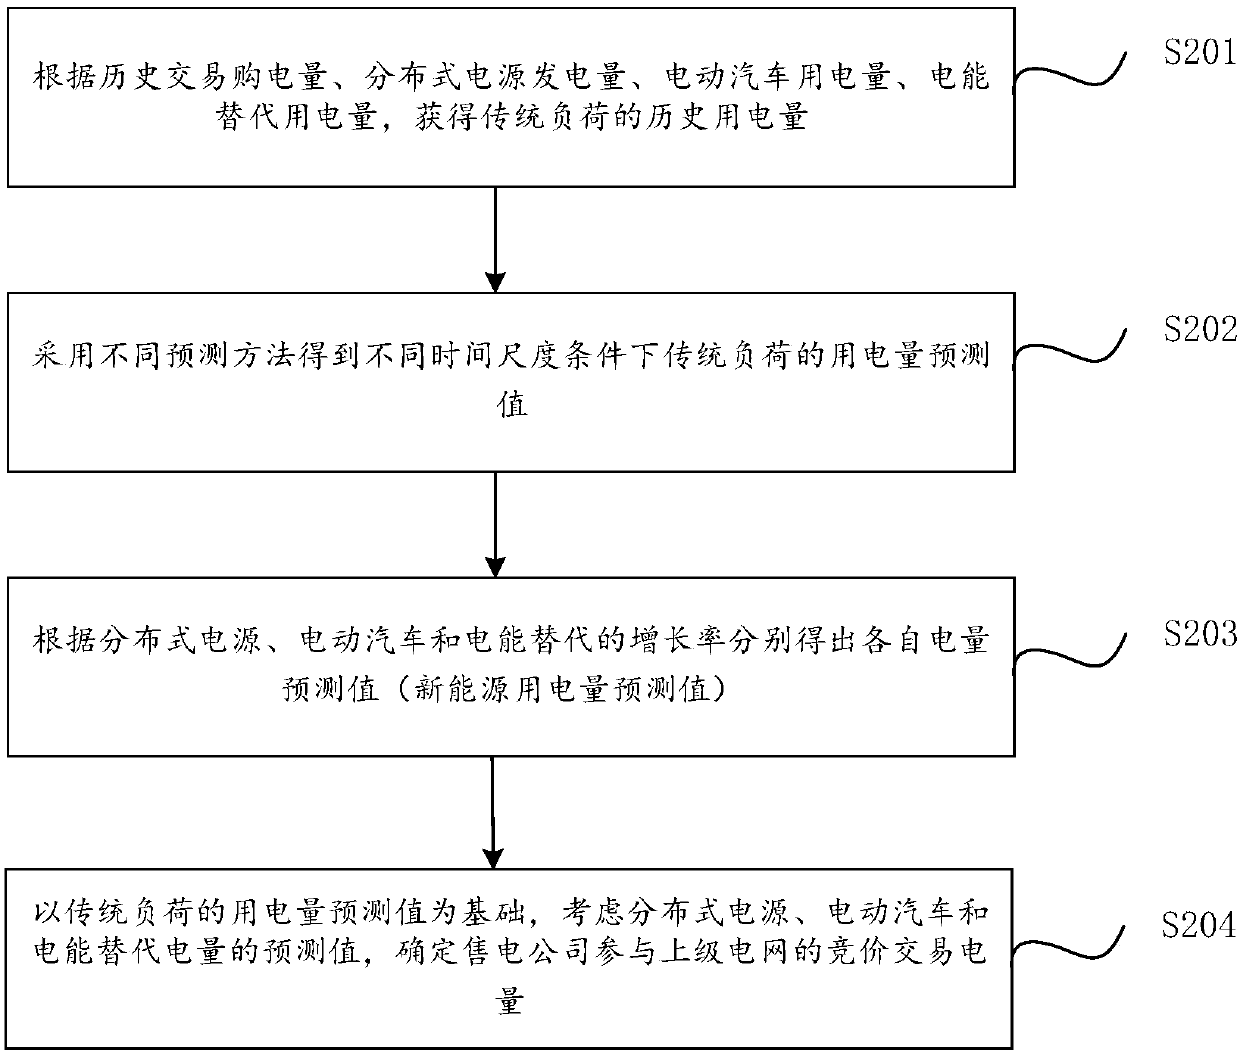 Multi-time scale electricity trade decision-making method and system in electric power company